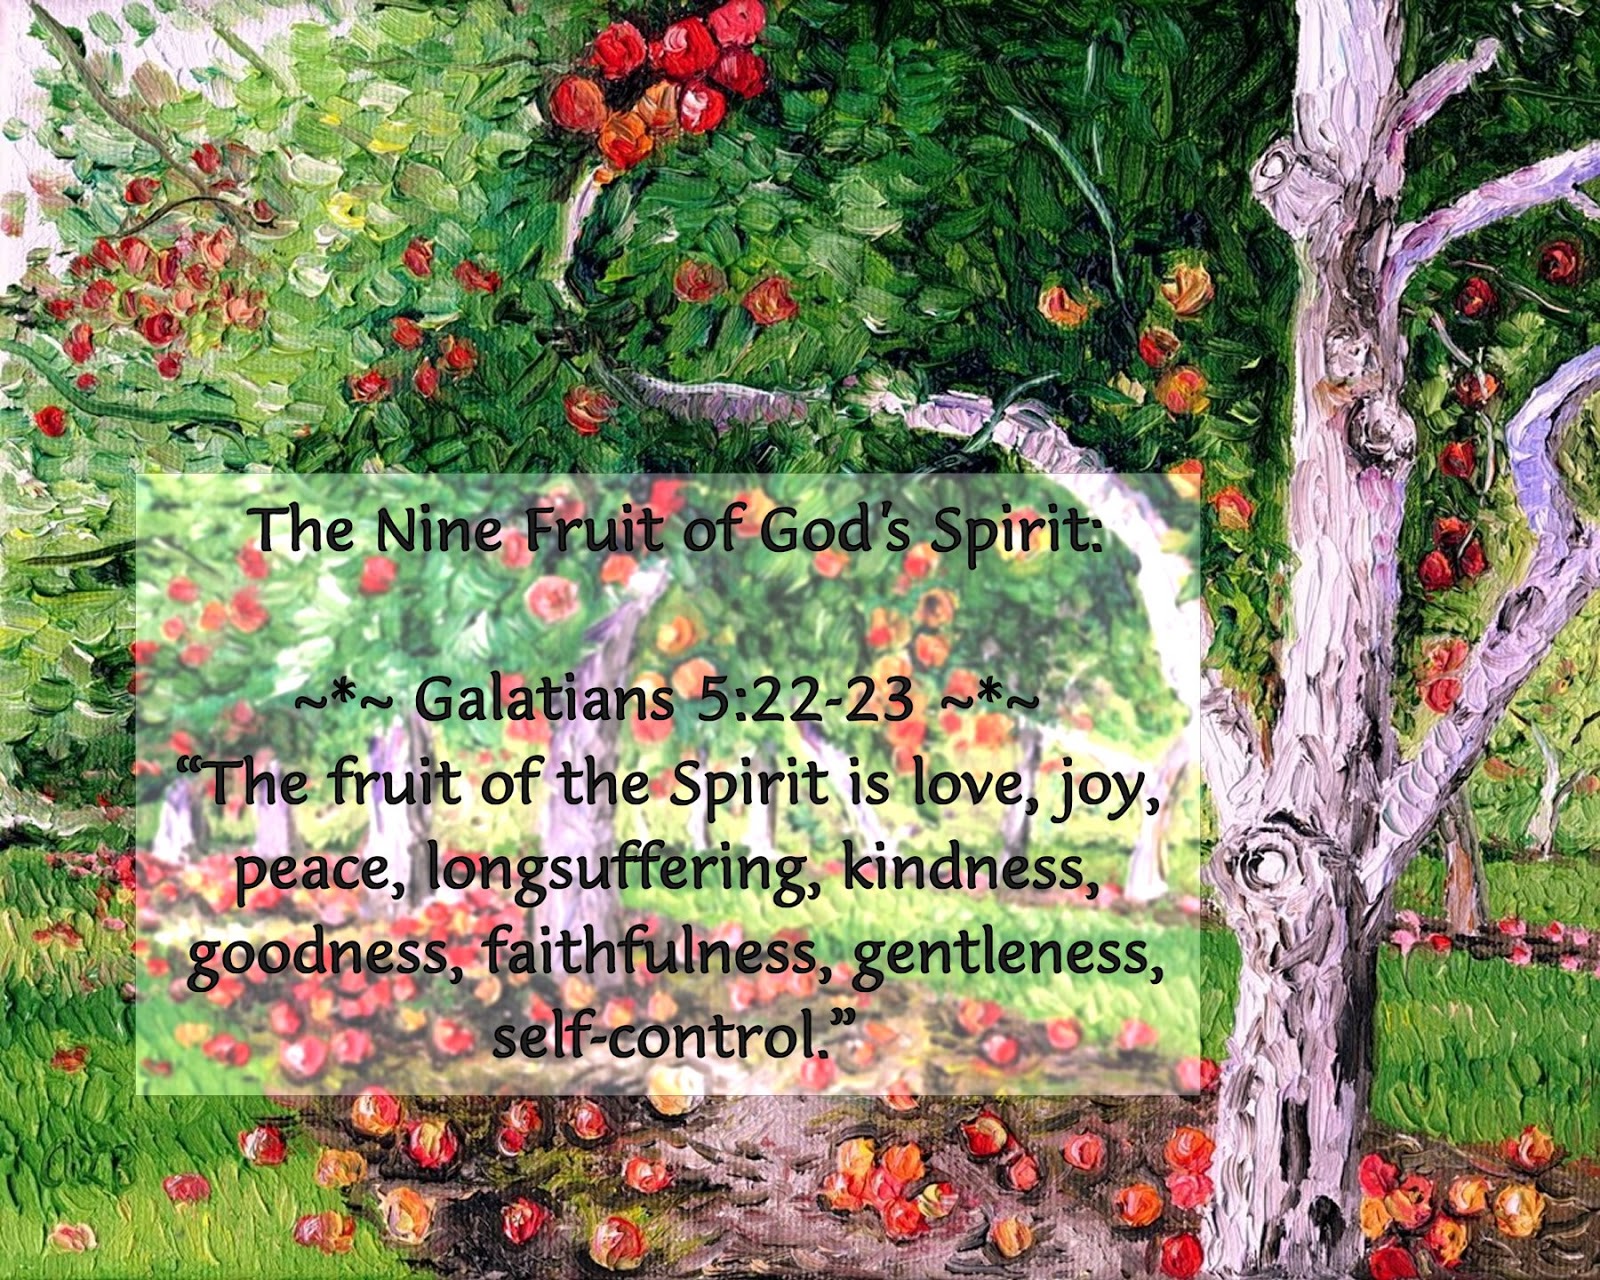 Difference between gifts and fruits of the holy spirit